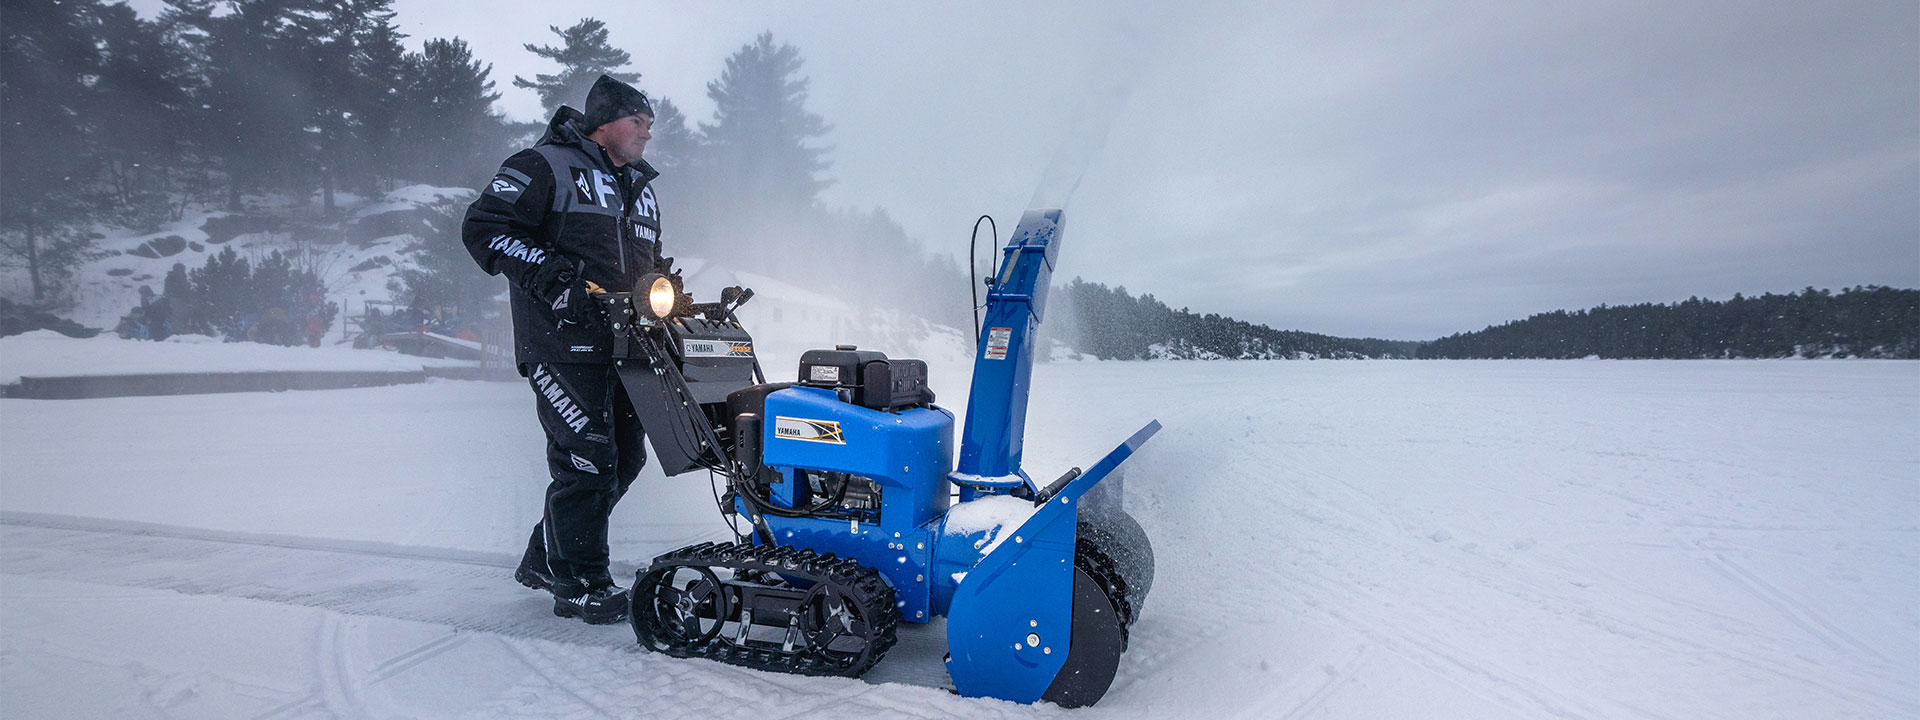 5 Things To Consider When Buying A Snowblower